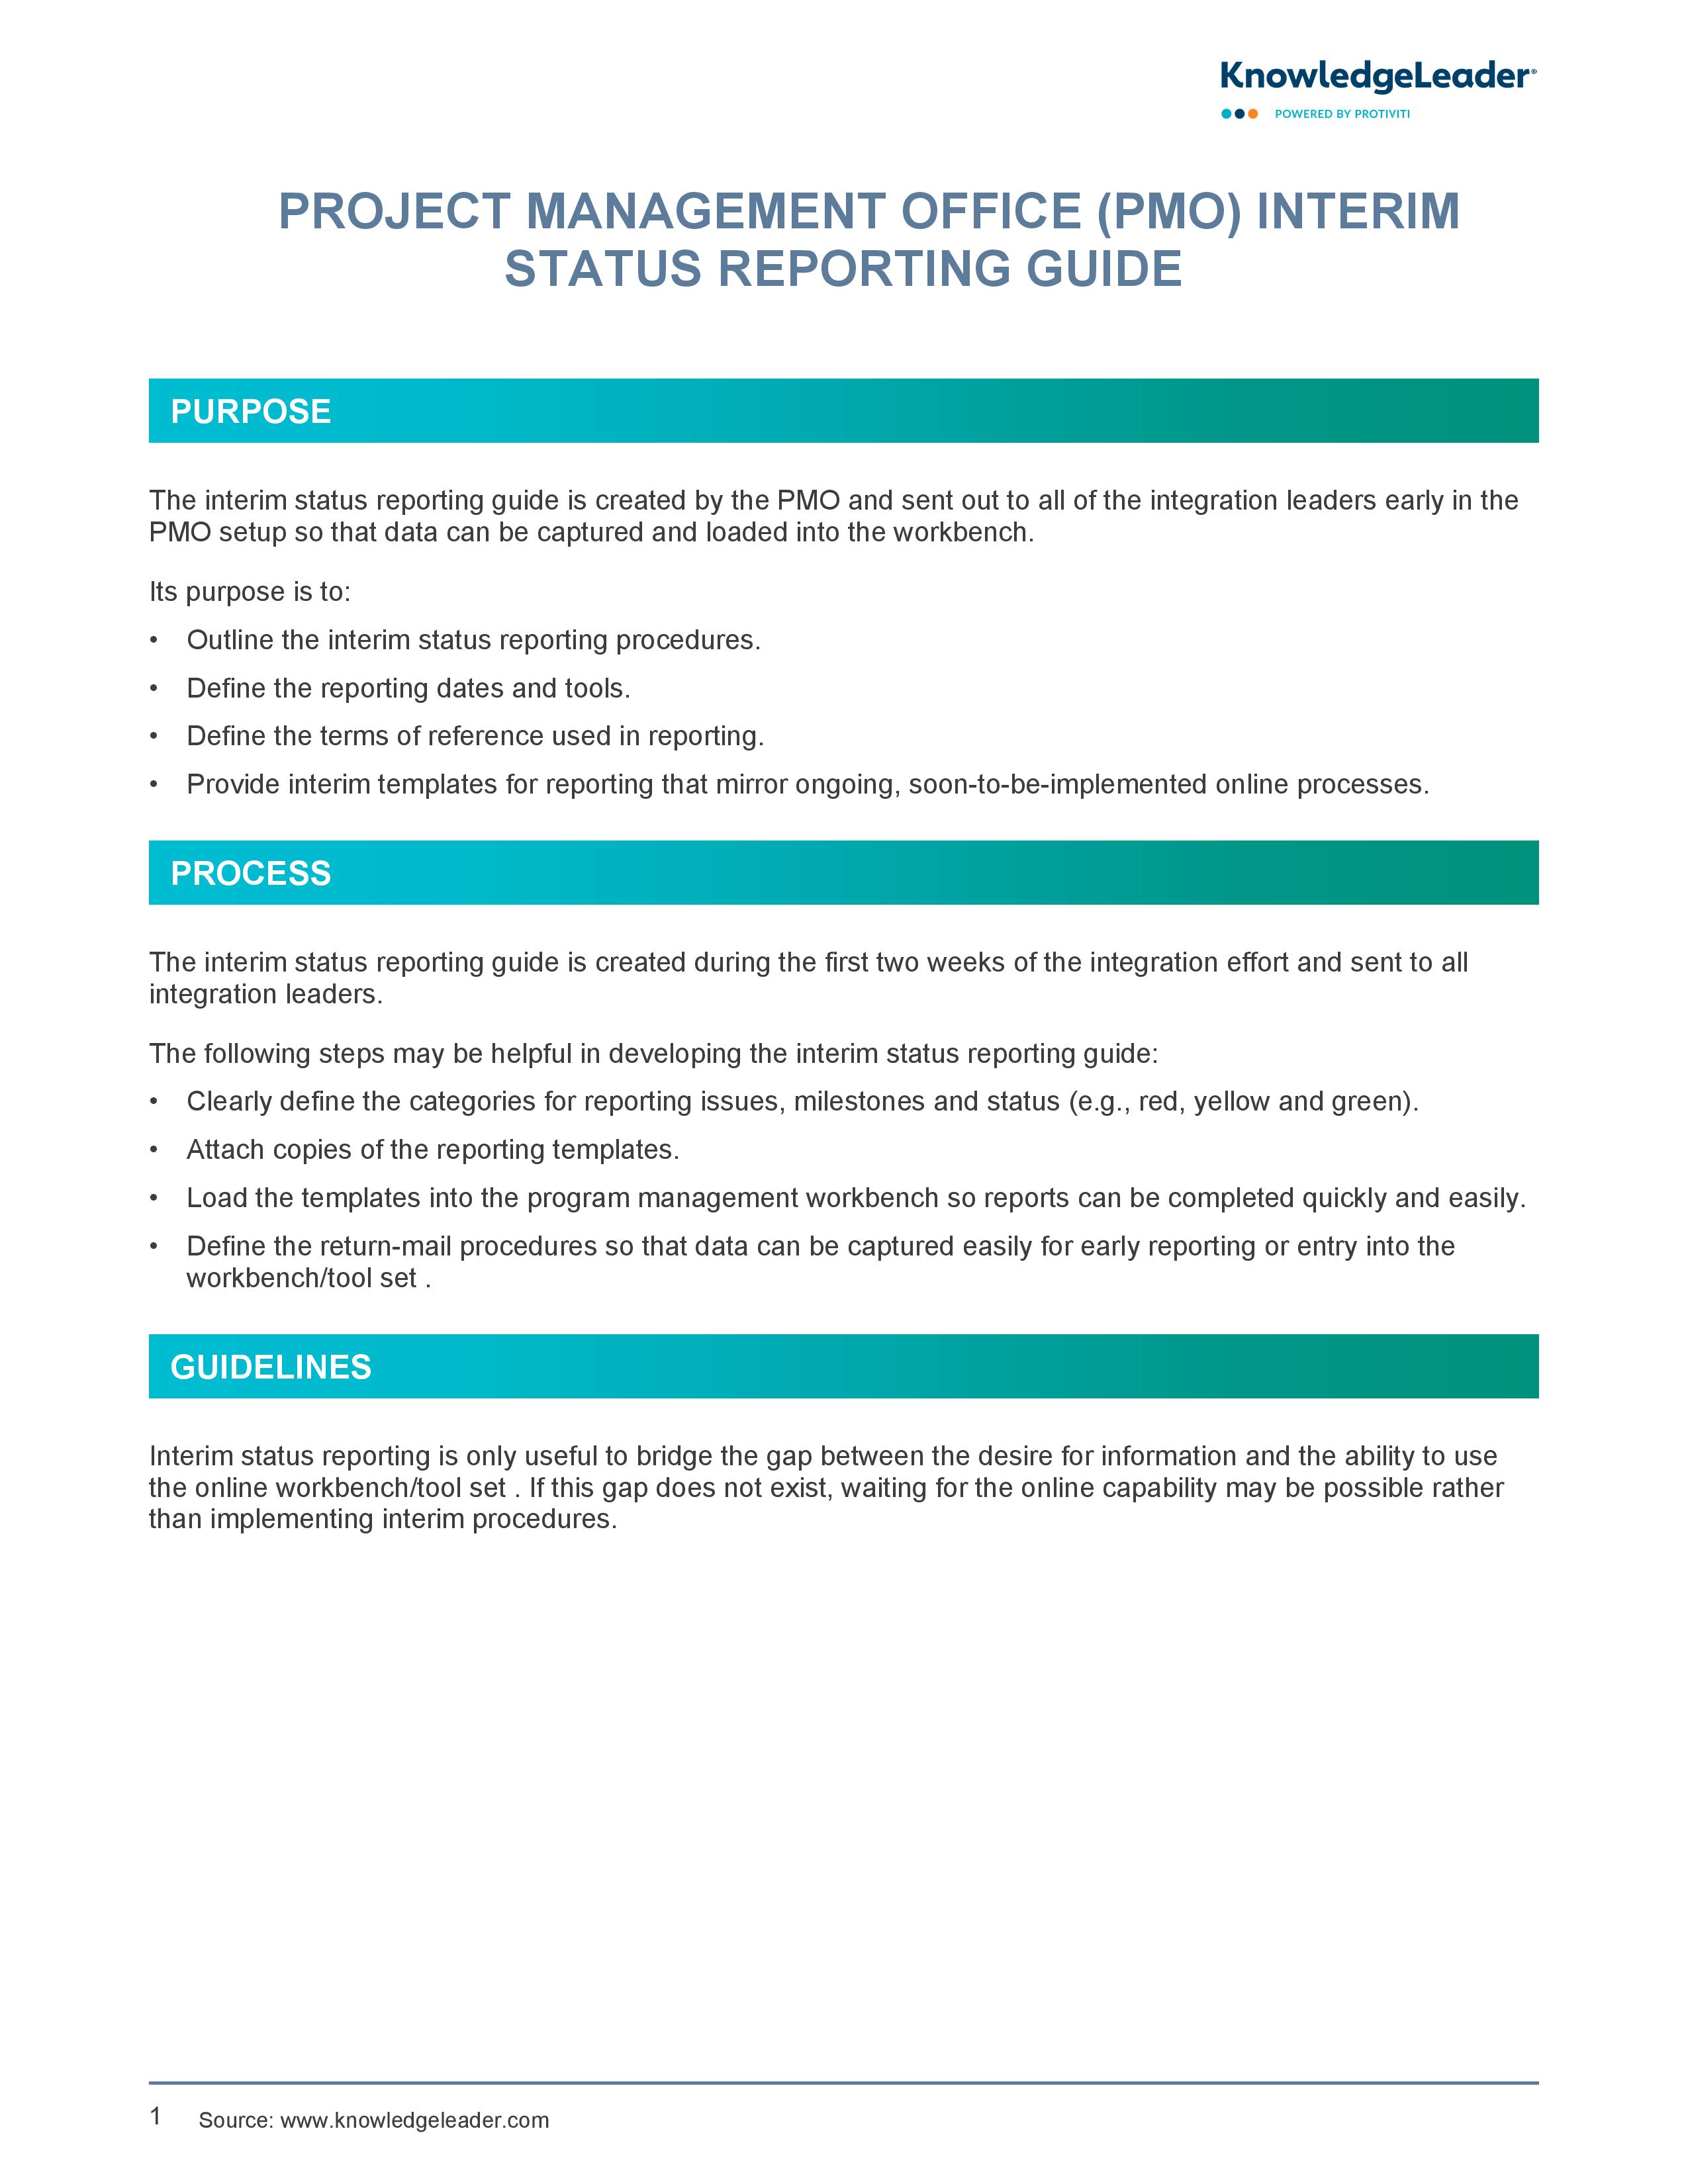 screenshot of the first page of Project Management Office (PMO) Interim Status Reporting Guide